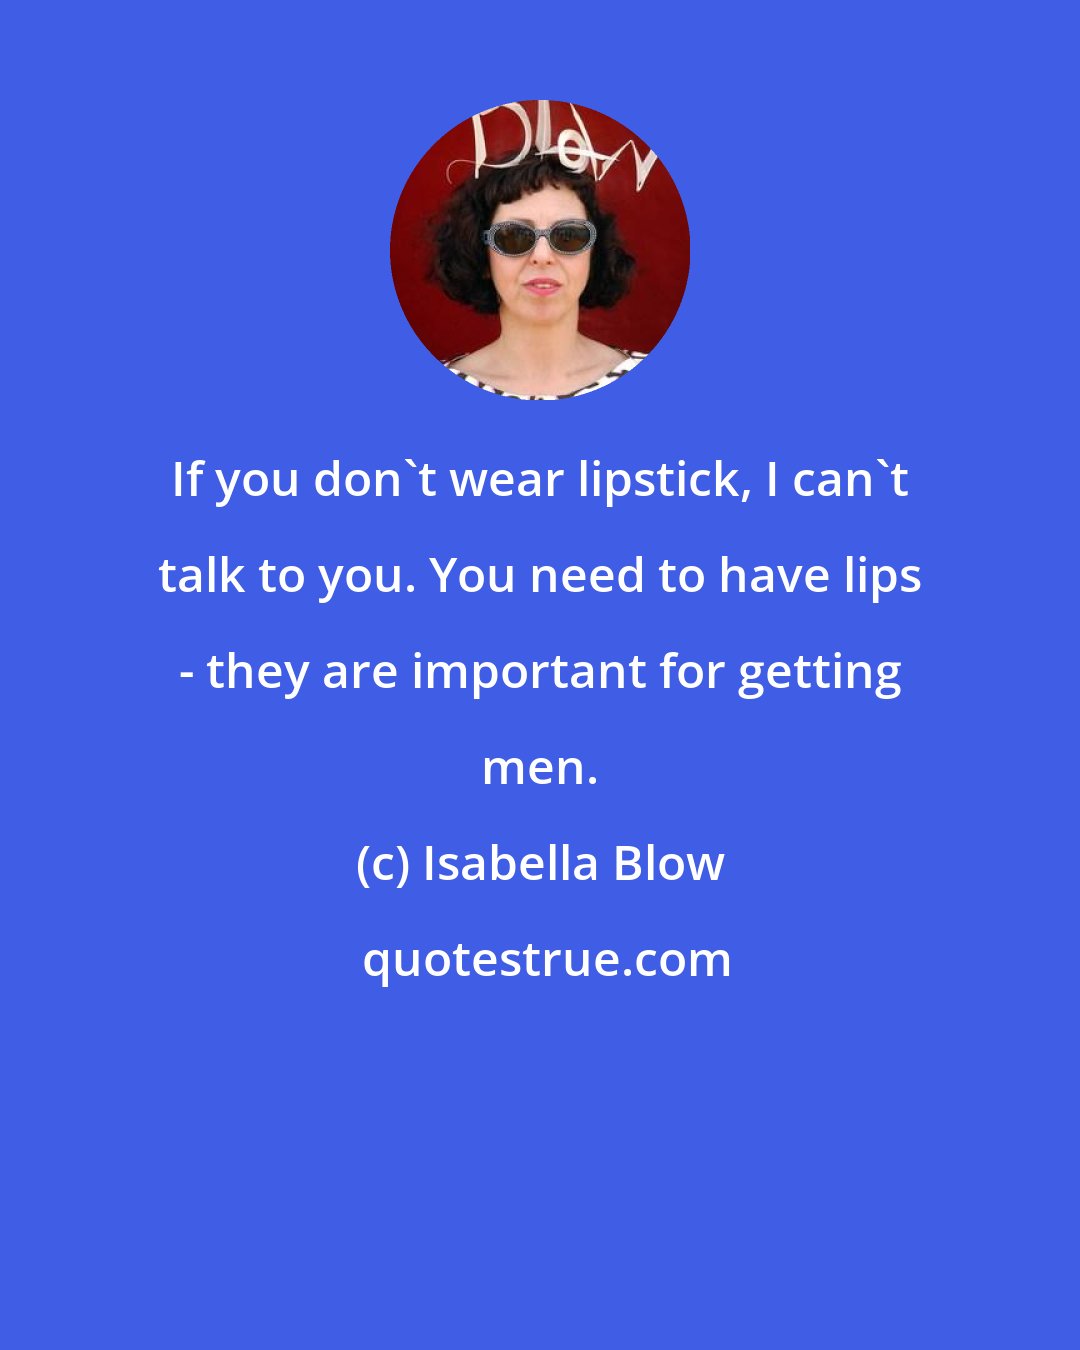 Isabella Blow: If you don't wear lipstick, I can't talk to you. You need to have lips - they are important for getting men.